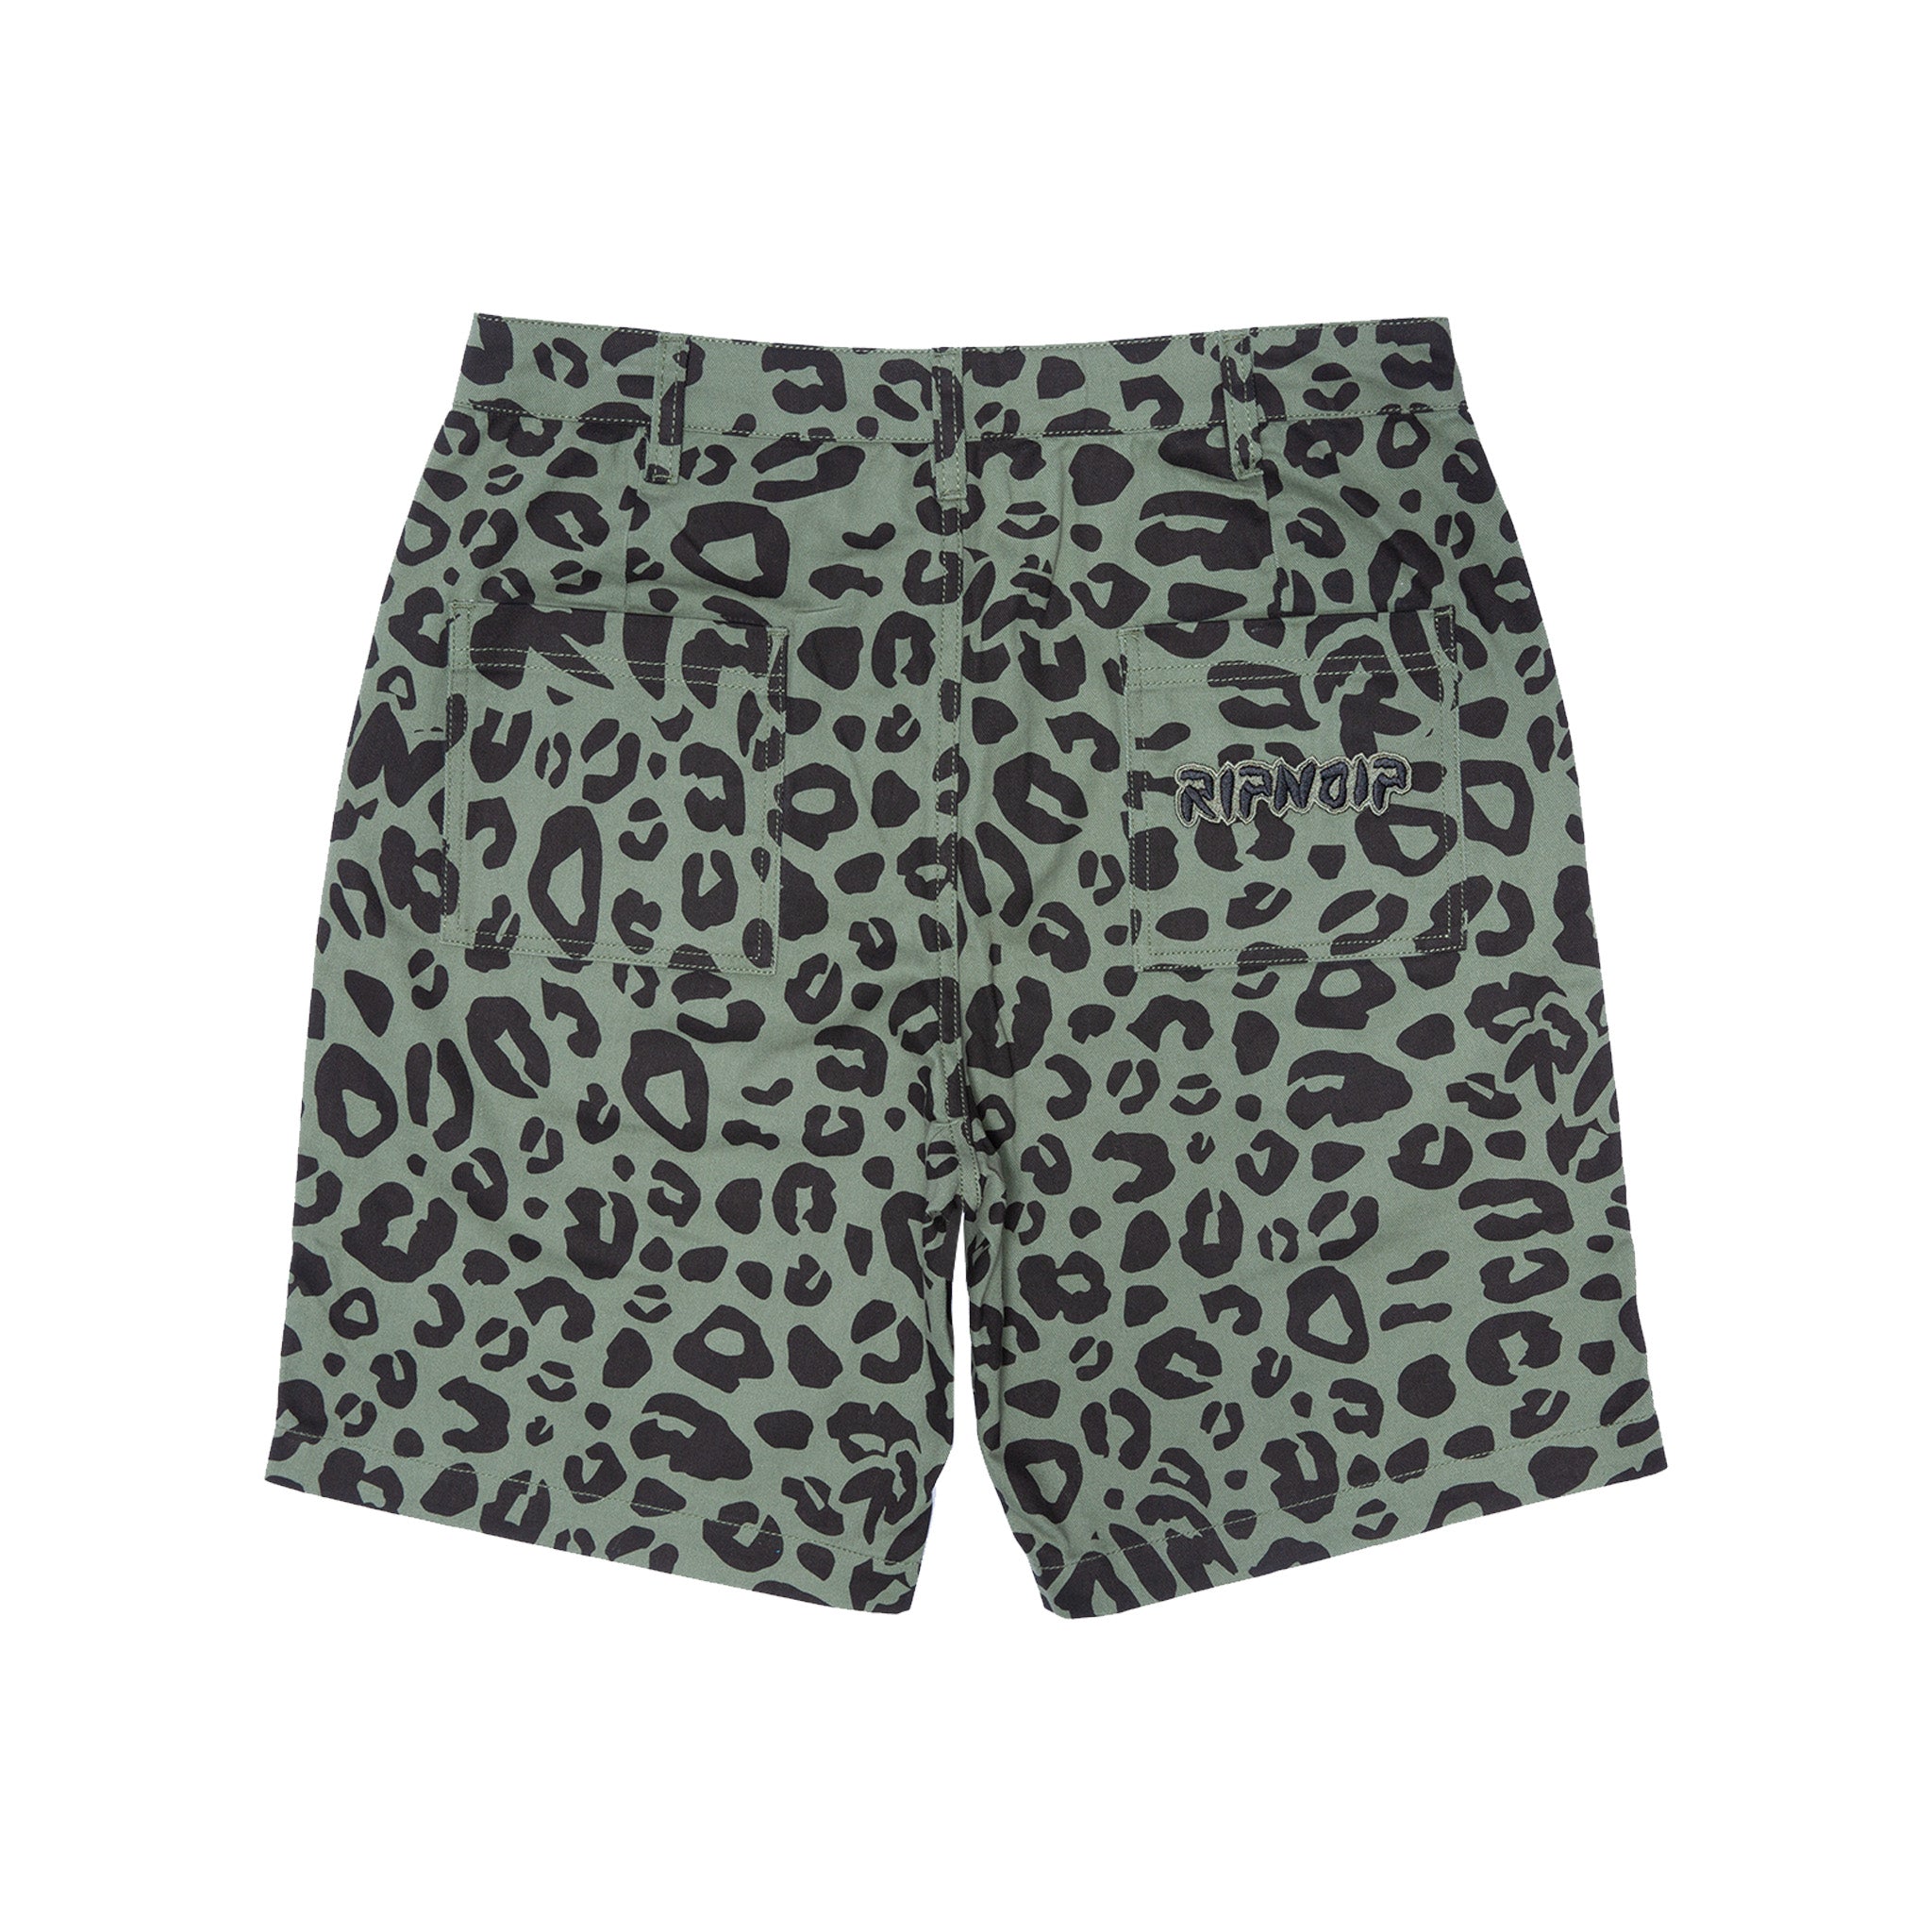 RIPNDIP Spotted Cotton Twill Shorts (Olive)